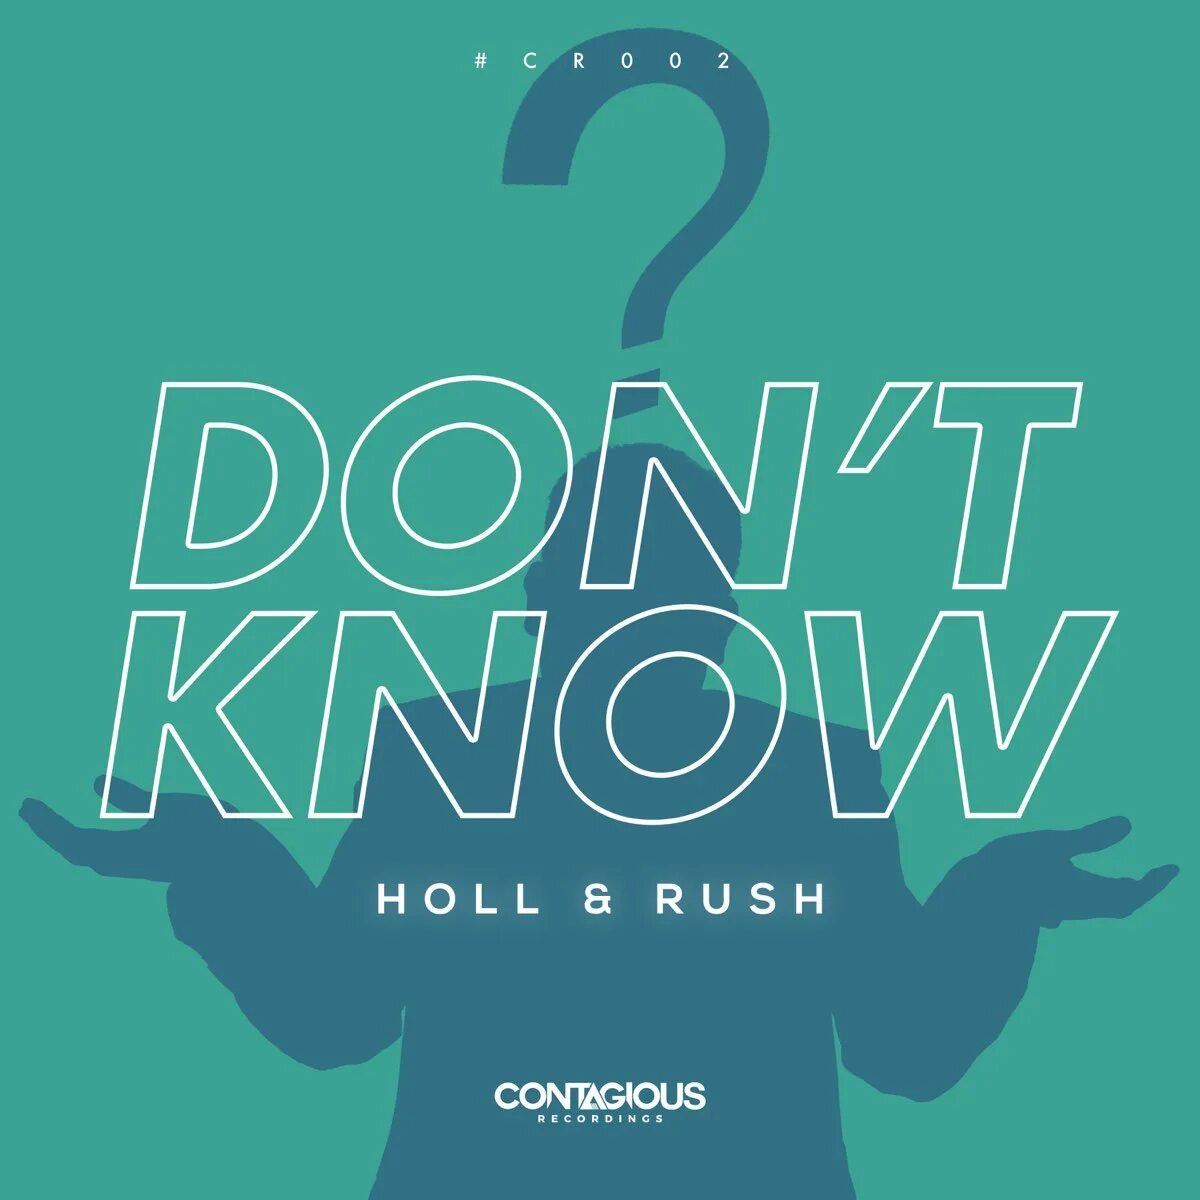 Owners don t know. Holl & Rush. Don't know Original Mix Holl Rush. Sonar Holl & Rush. Don't Rush.